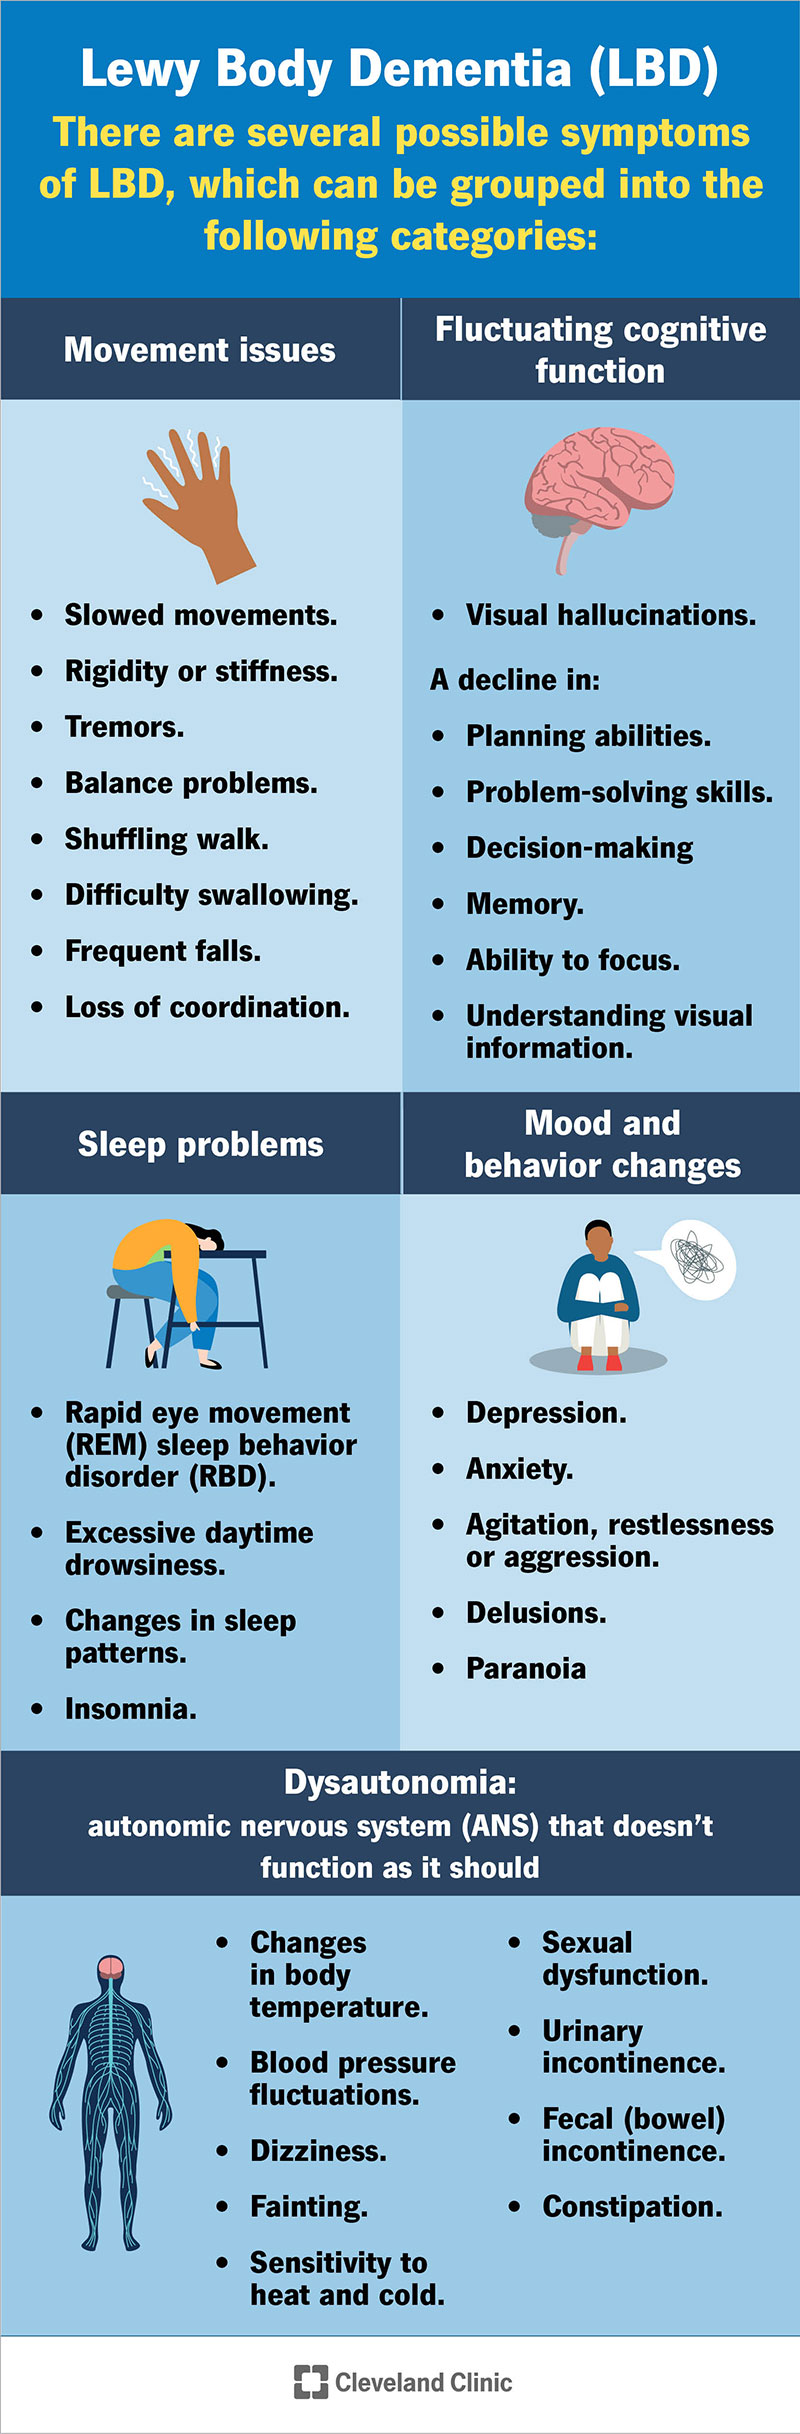 Lewy body dementia symptoms include movement issues, fluctuating cognitive function, sleep problems, mood changes and dysautonomia.